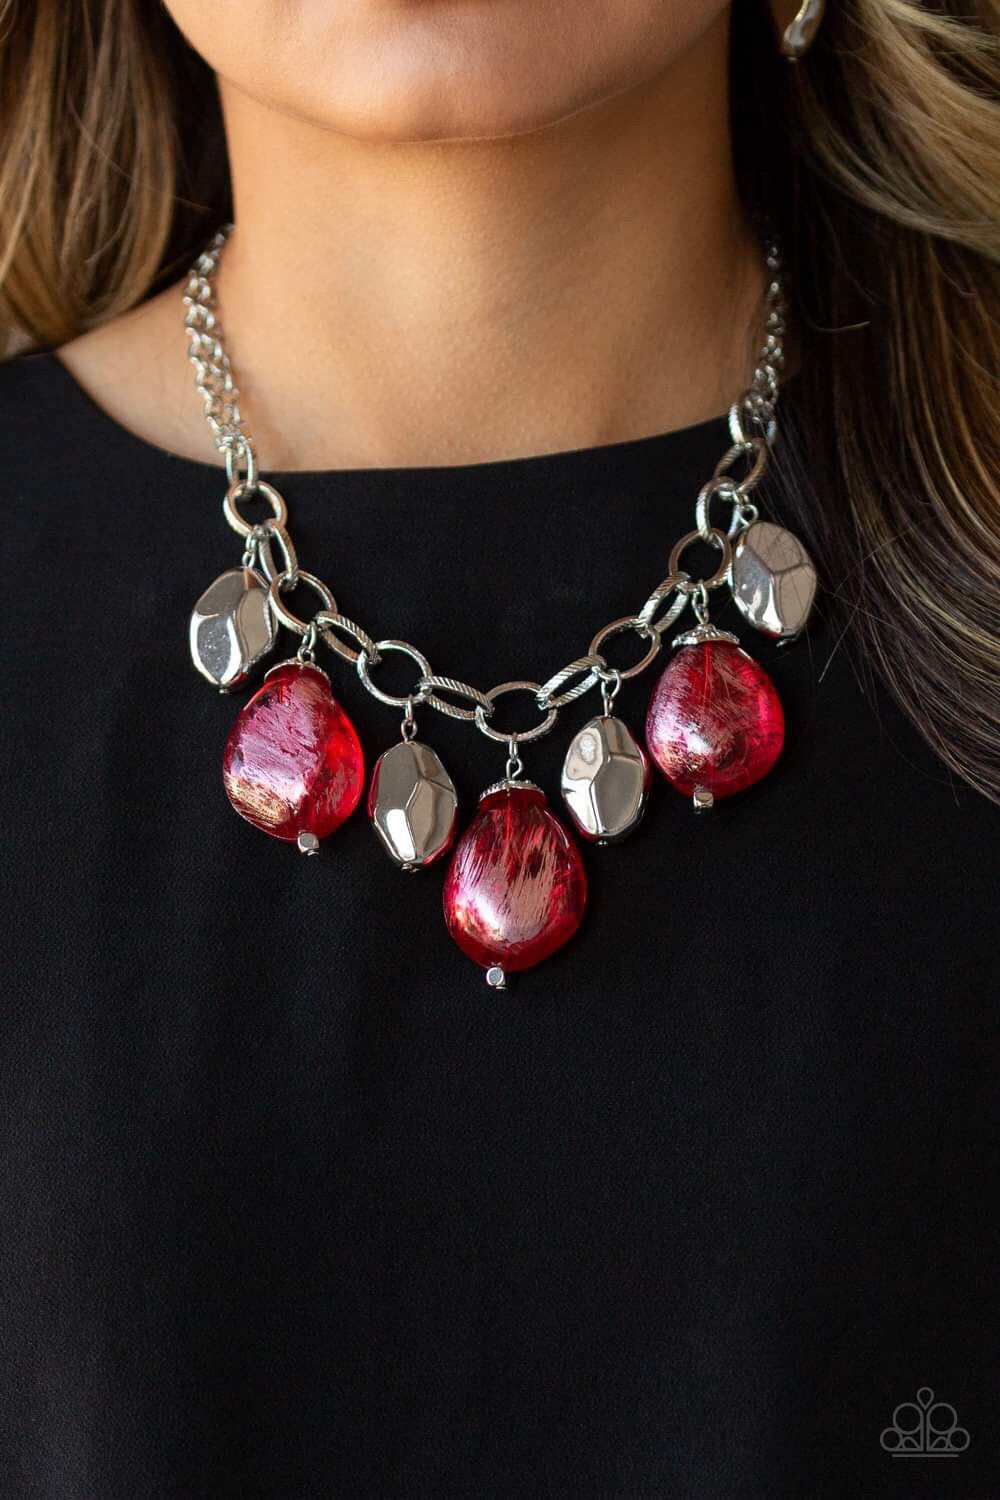 Paparazzi Jewelry Necklace Looking Glass Glamorous - Red